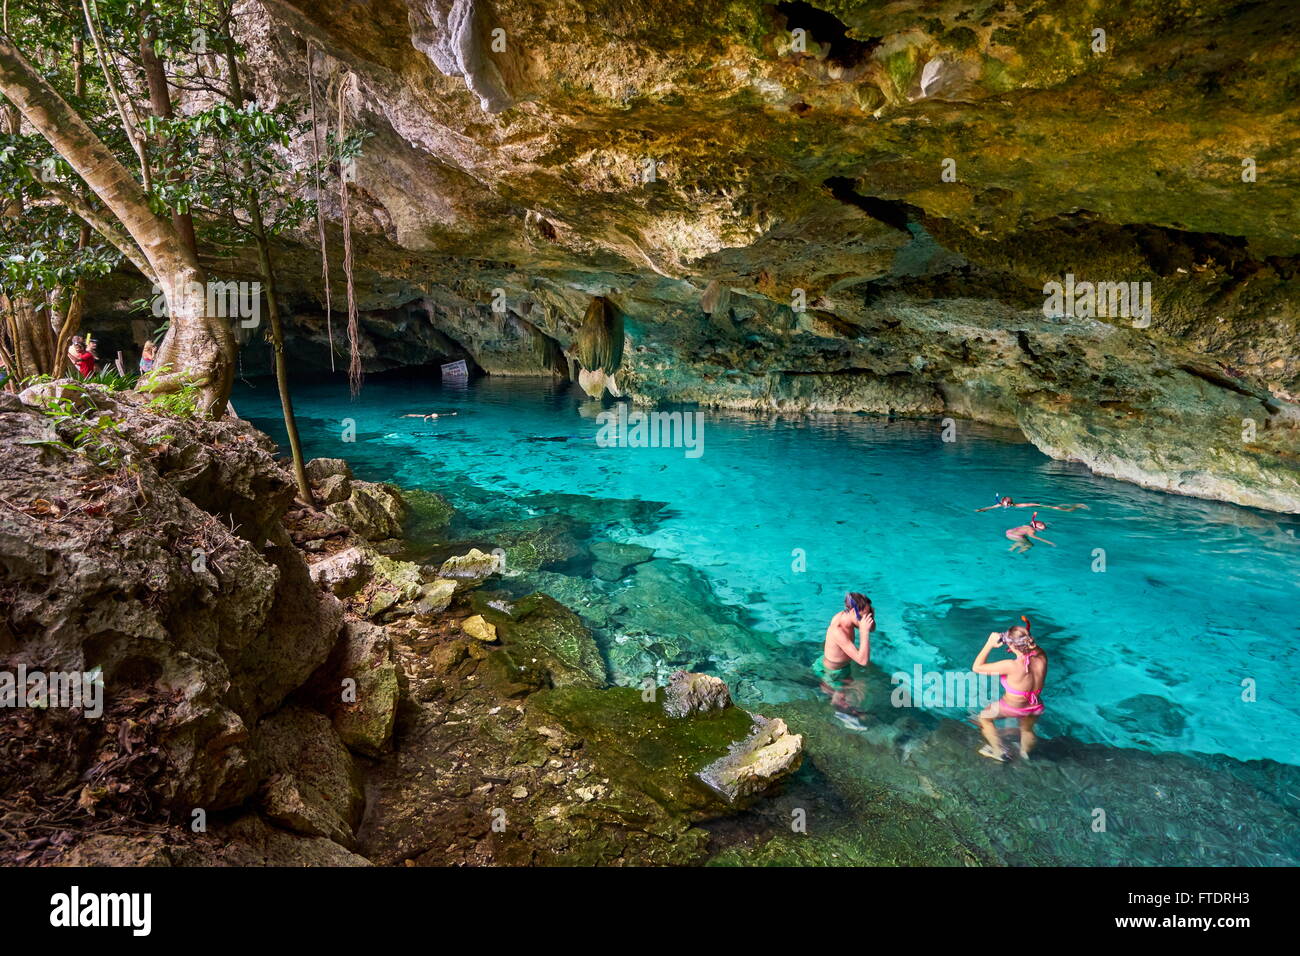 Tourist relaxing in Two Eyes Cenote (Cénote Dos Ojos), Yucatan, Mexico. Stock Photo